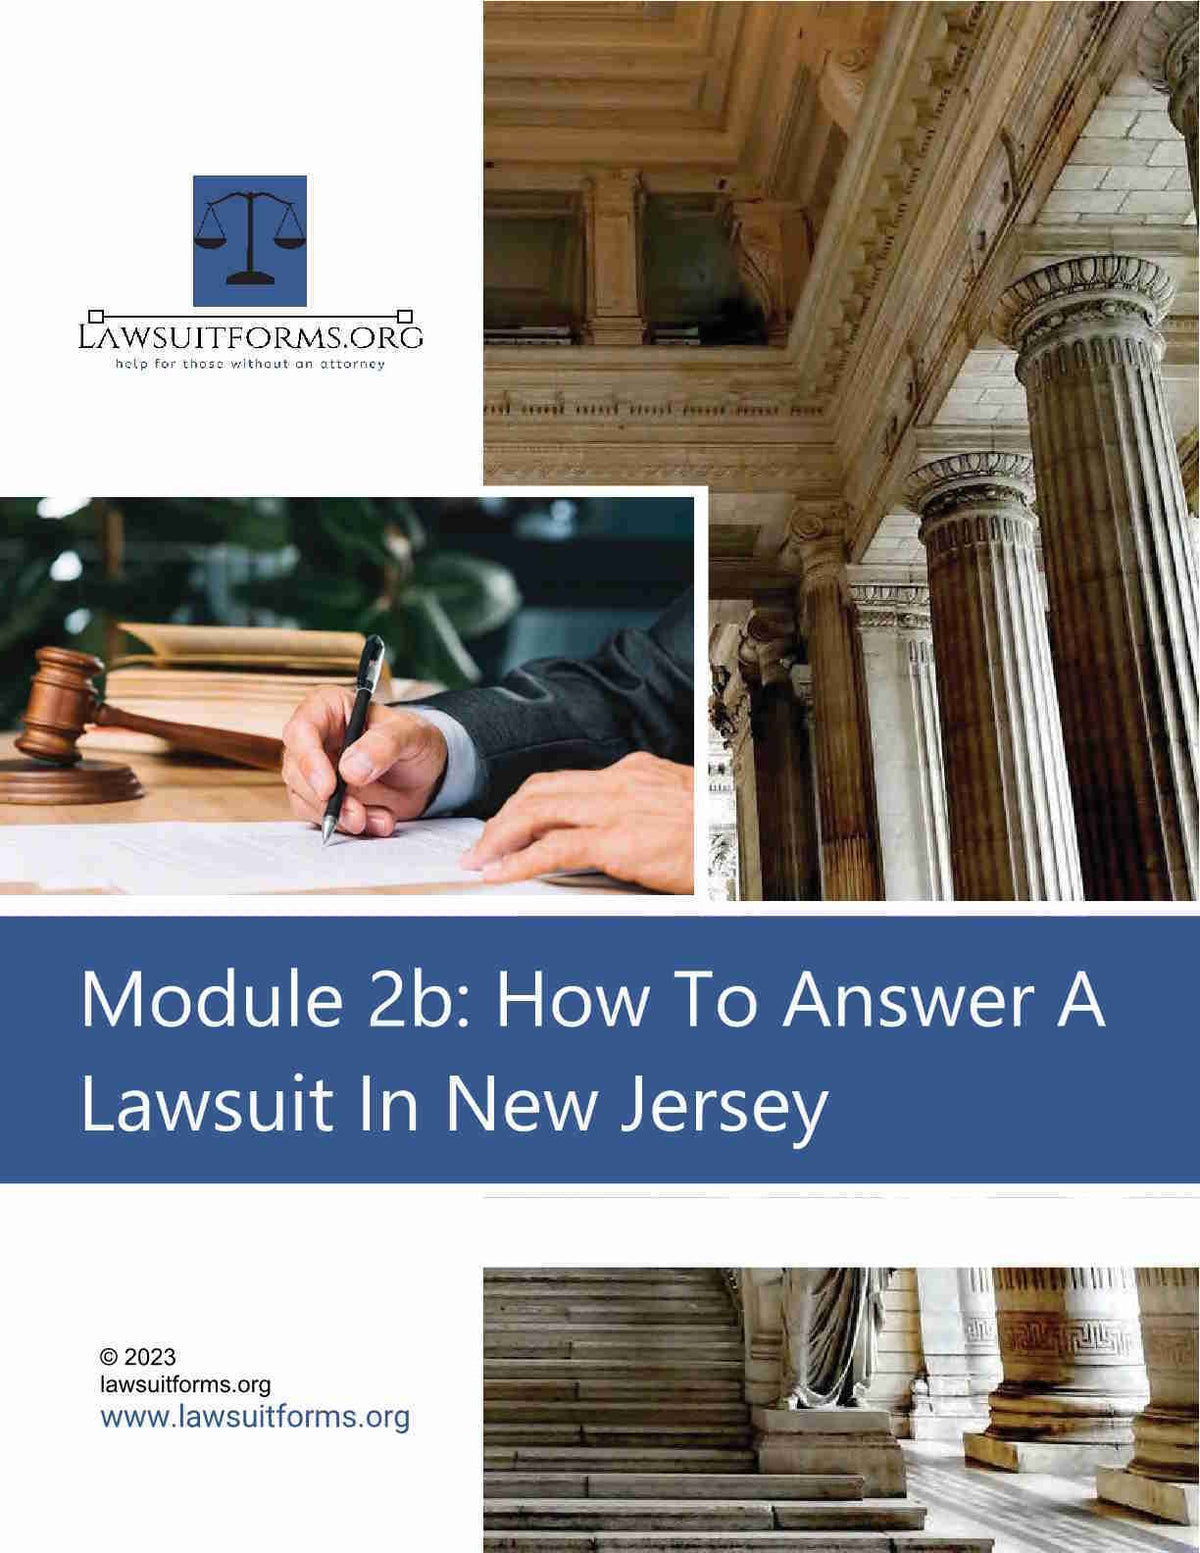 How to answer a lawsuit in New Jersey